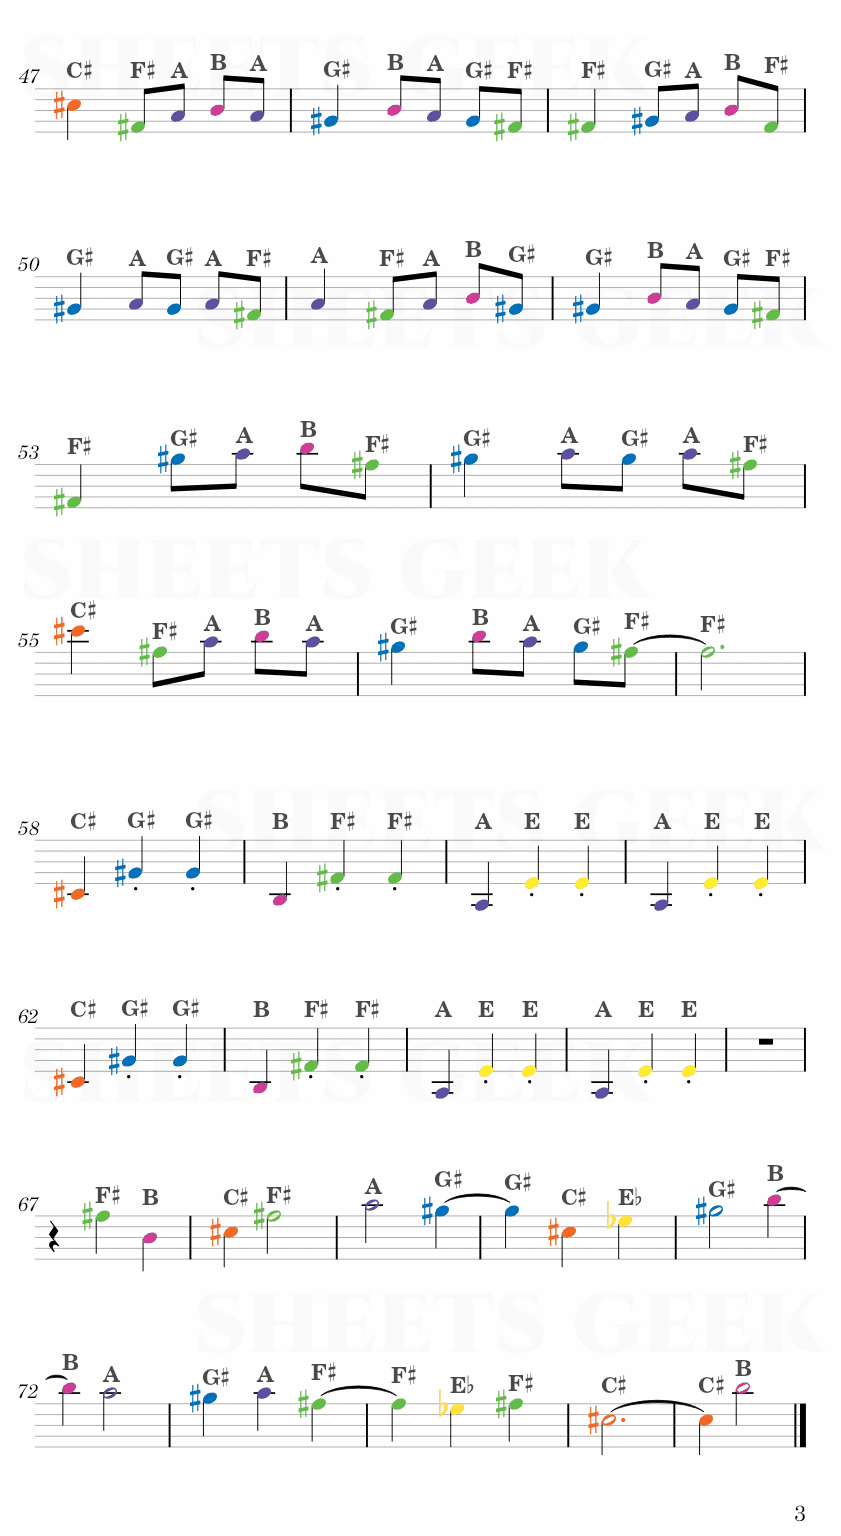 Circus Monster - Megurine Luka (CircusP) Easy Sheet Music Free for piano, keyboard, flute, violin, sax, cello page 3